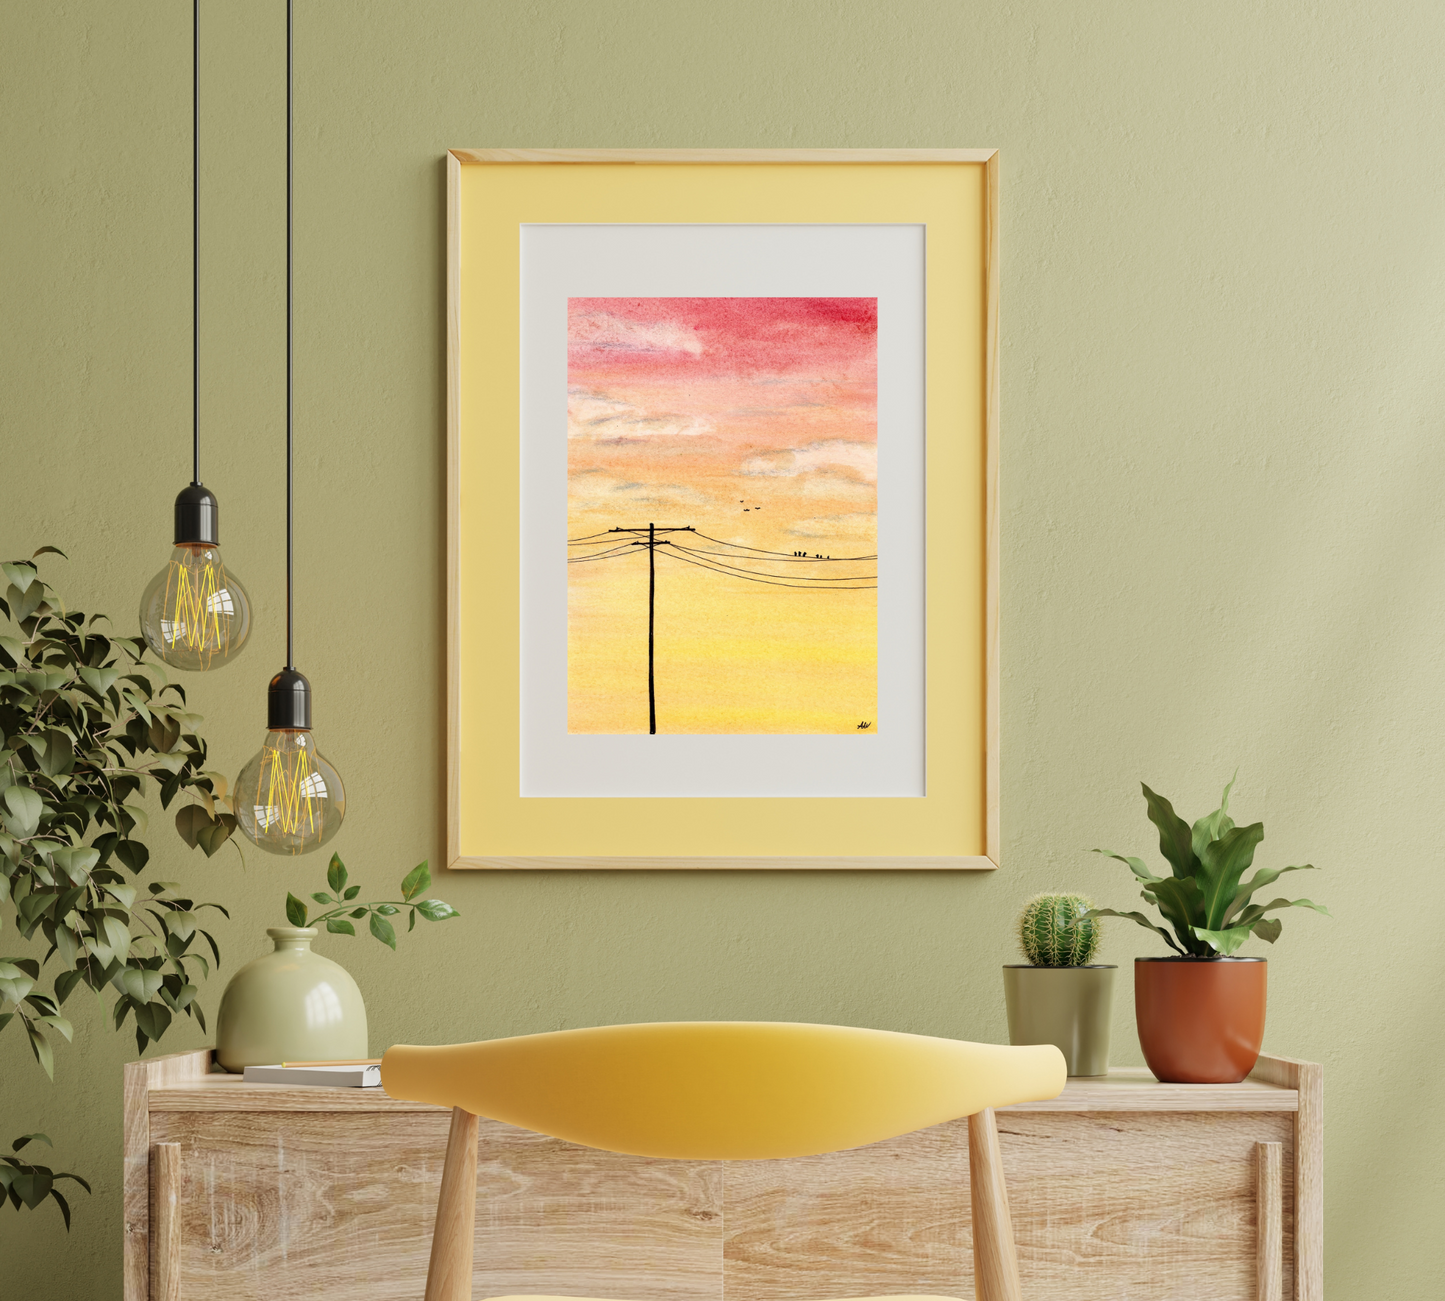 Sunset Sky and Powerlines in Pen and Watercolor - Archival Quality Art Print